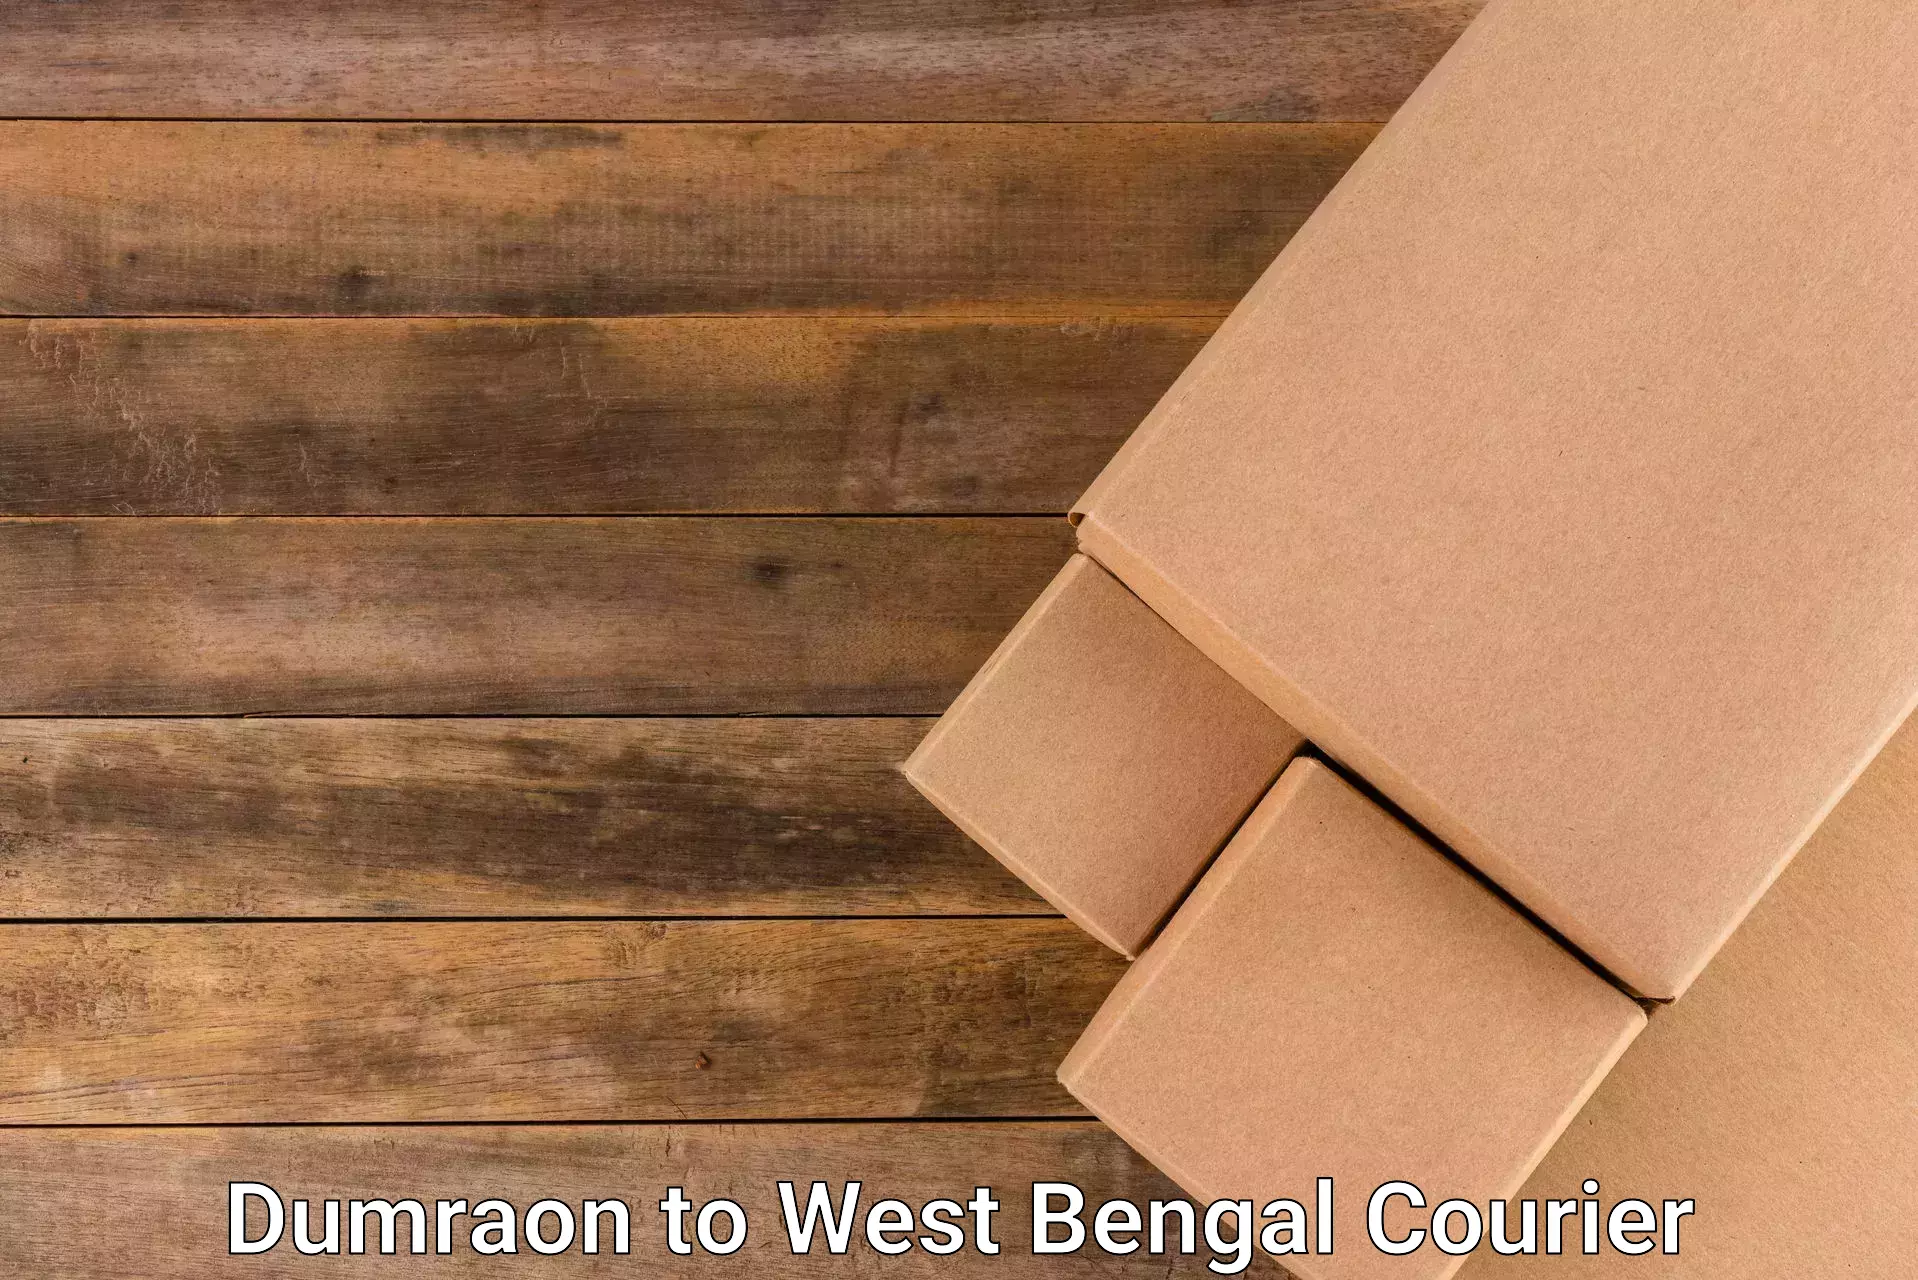 Courier service booking Dumraon to West Bengal